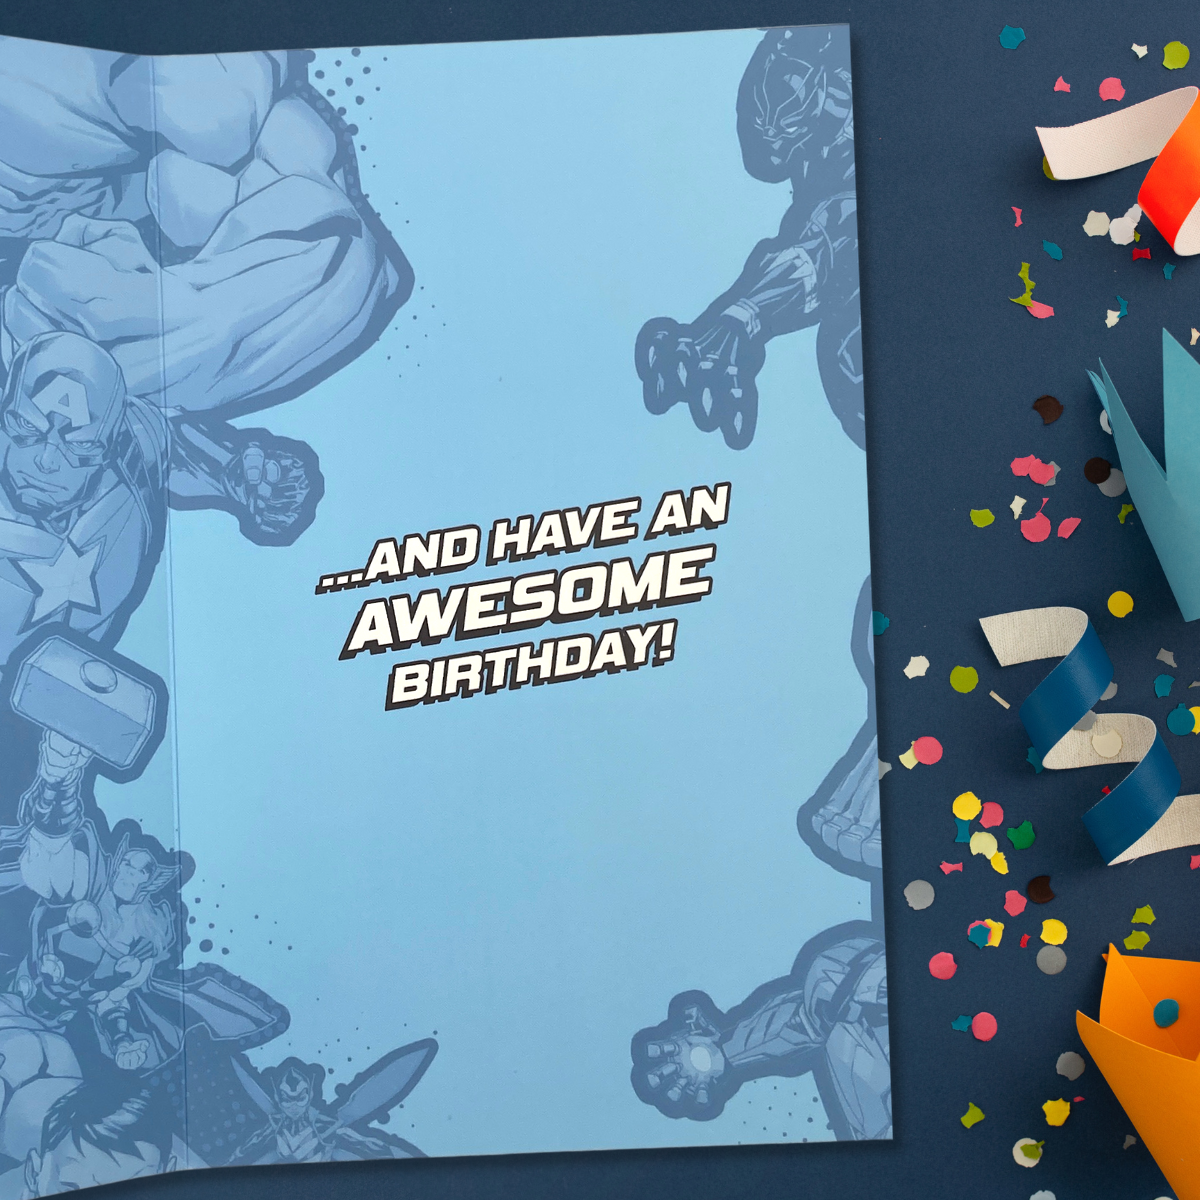 Inside Of Marvel Birthday Card To Show Printed Text